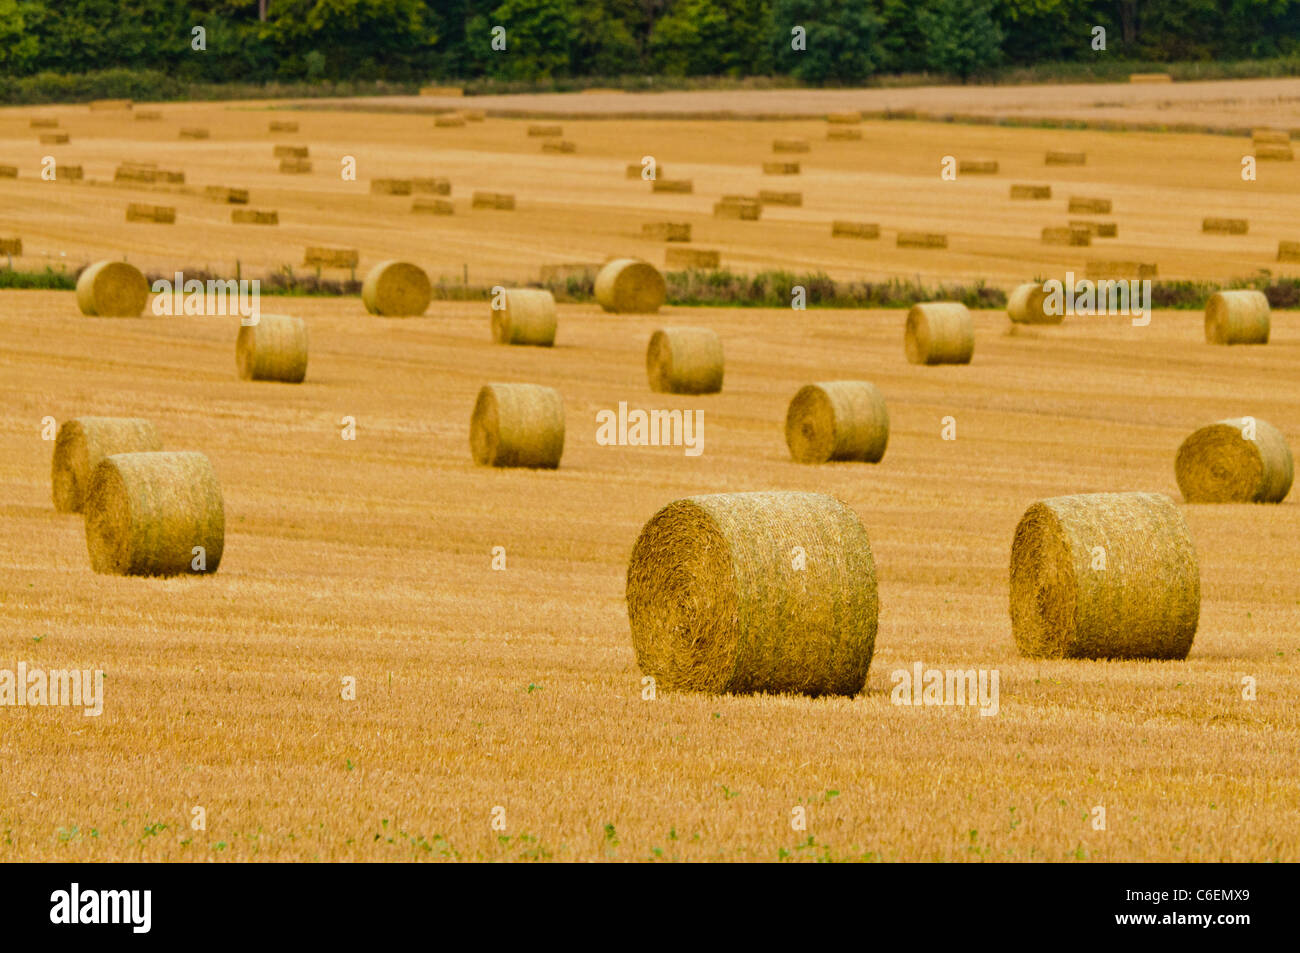 Large bales of hay in a field after harvesting Stock Photo